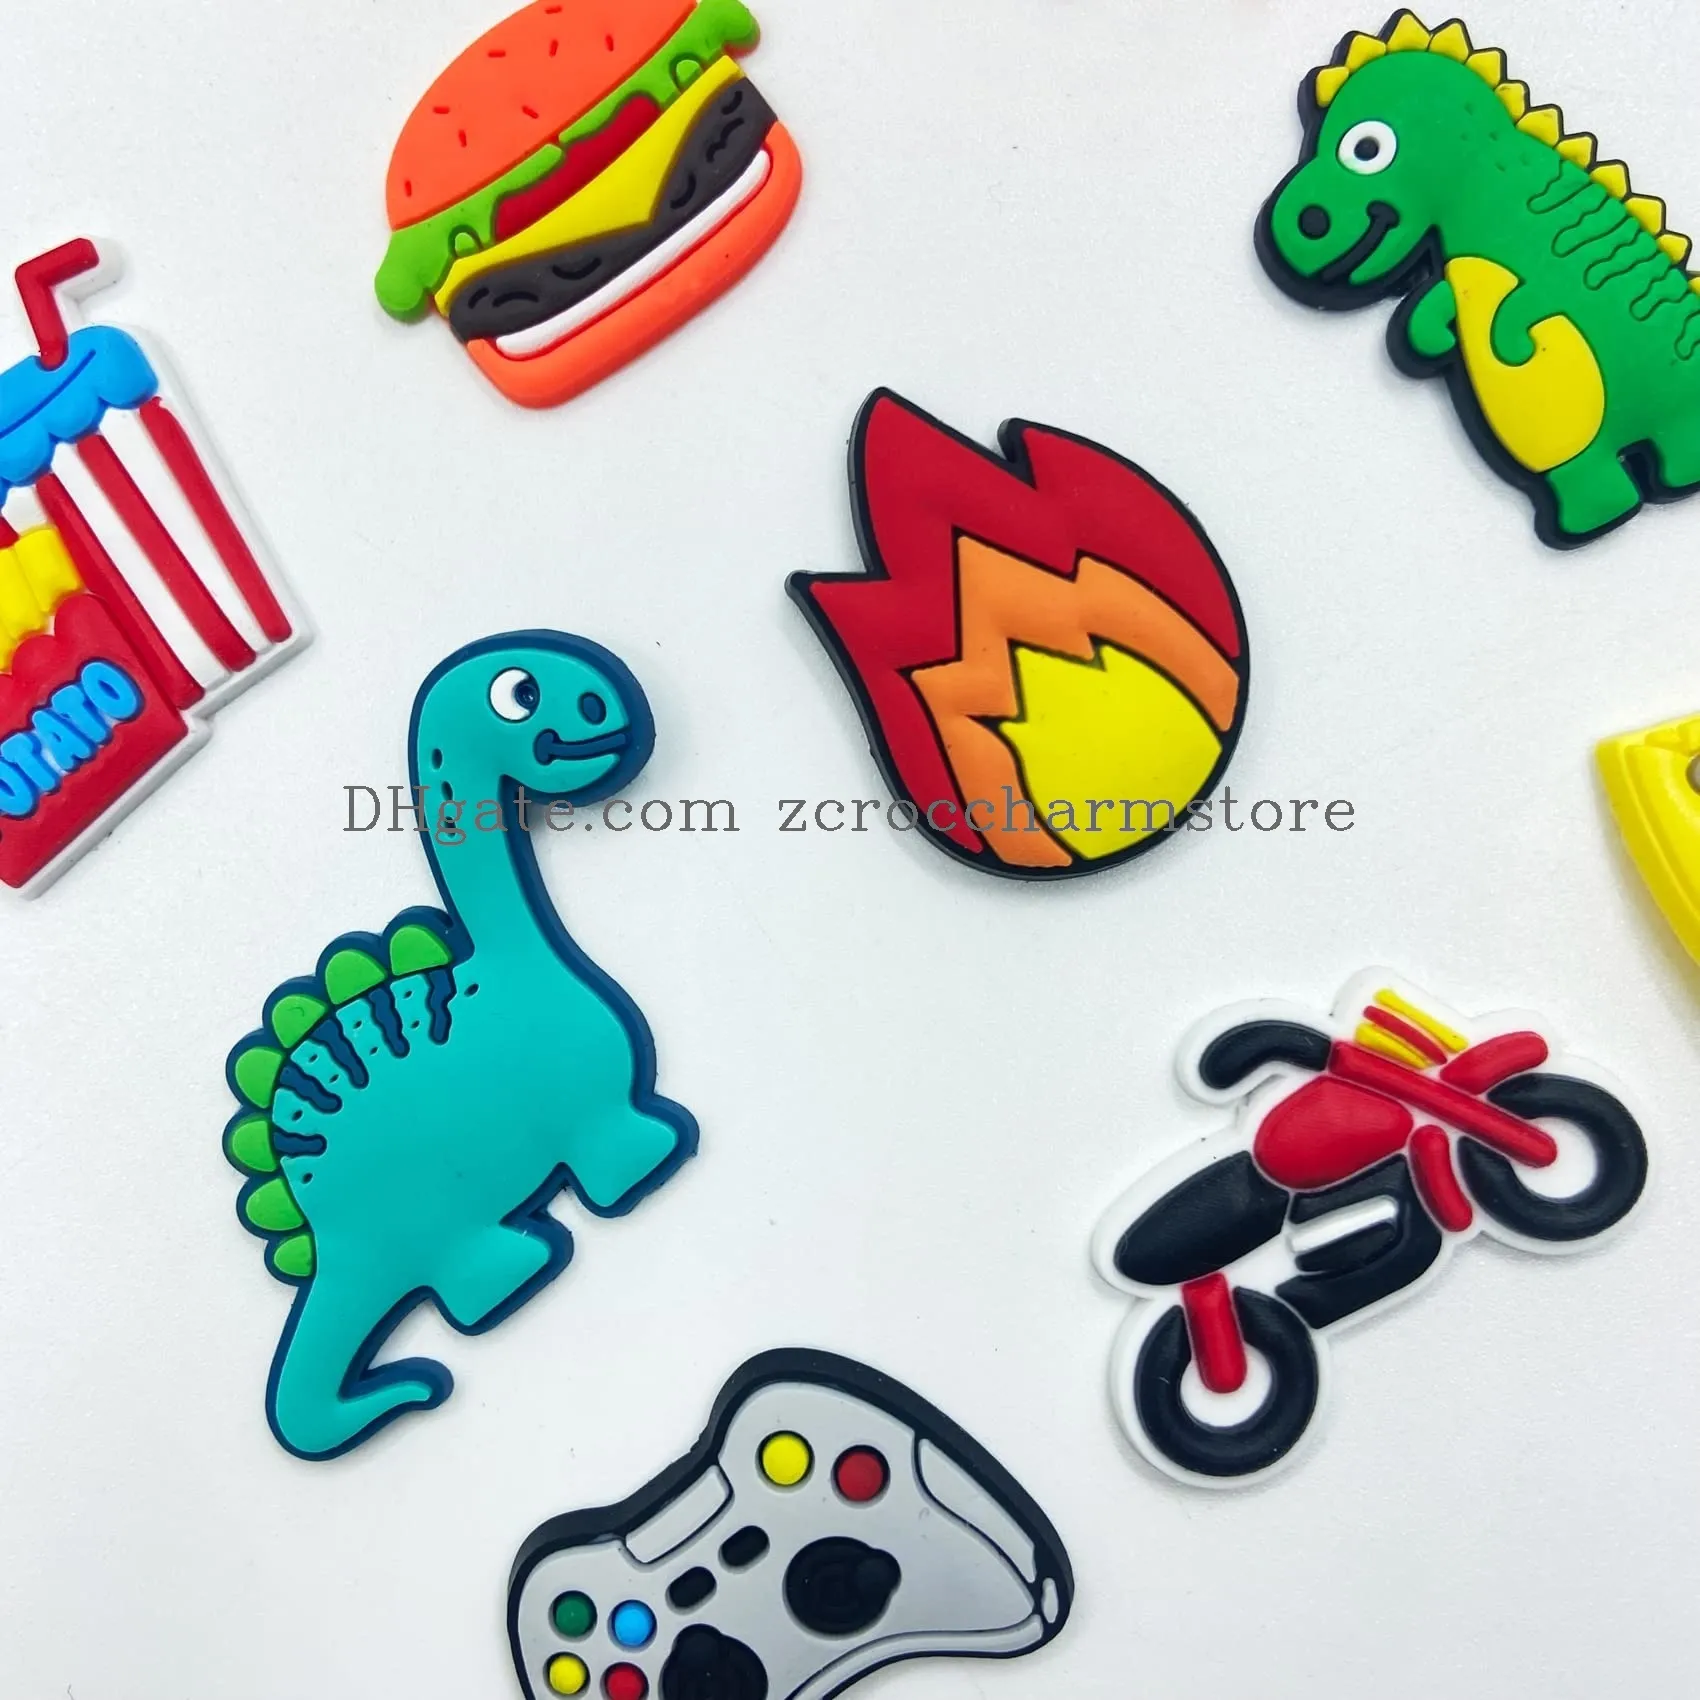 croc charms for boys sports gibits basketball and football baseball softball soccer with sneakers pvc charms for  cute dinosaur shoe charms for bracelet boys croc gibits for kids teens gifts